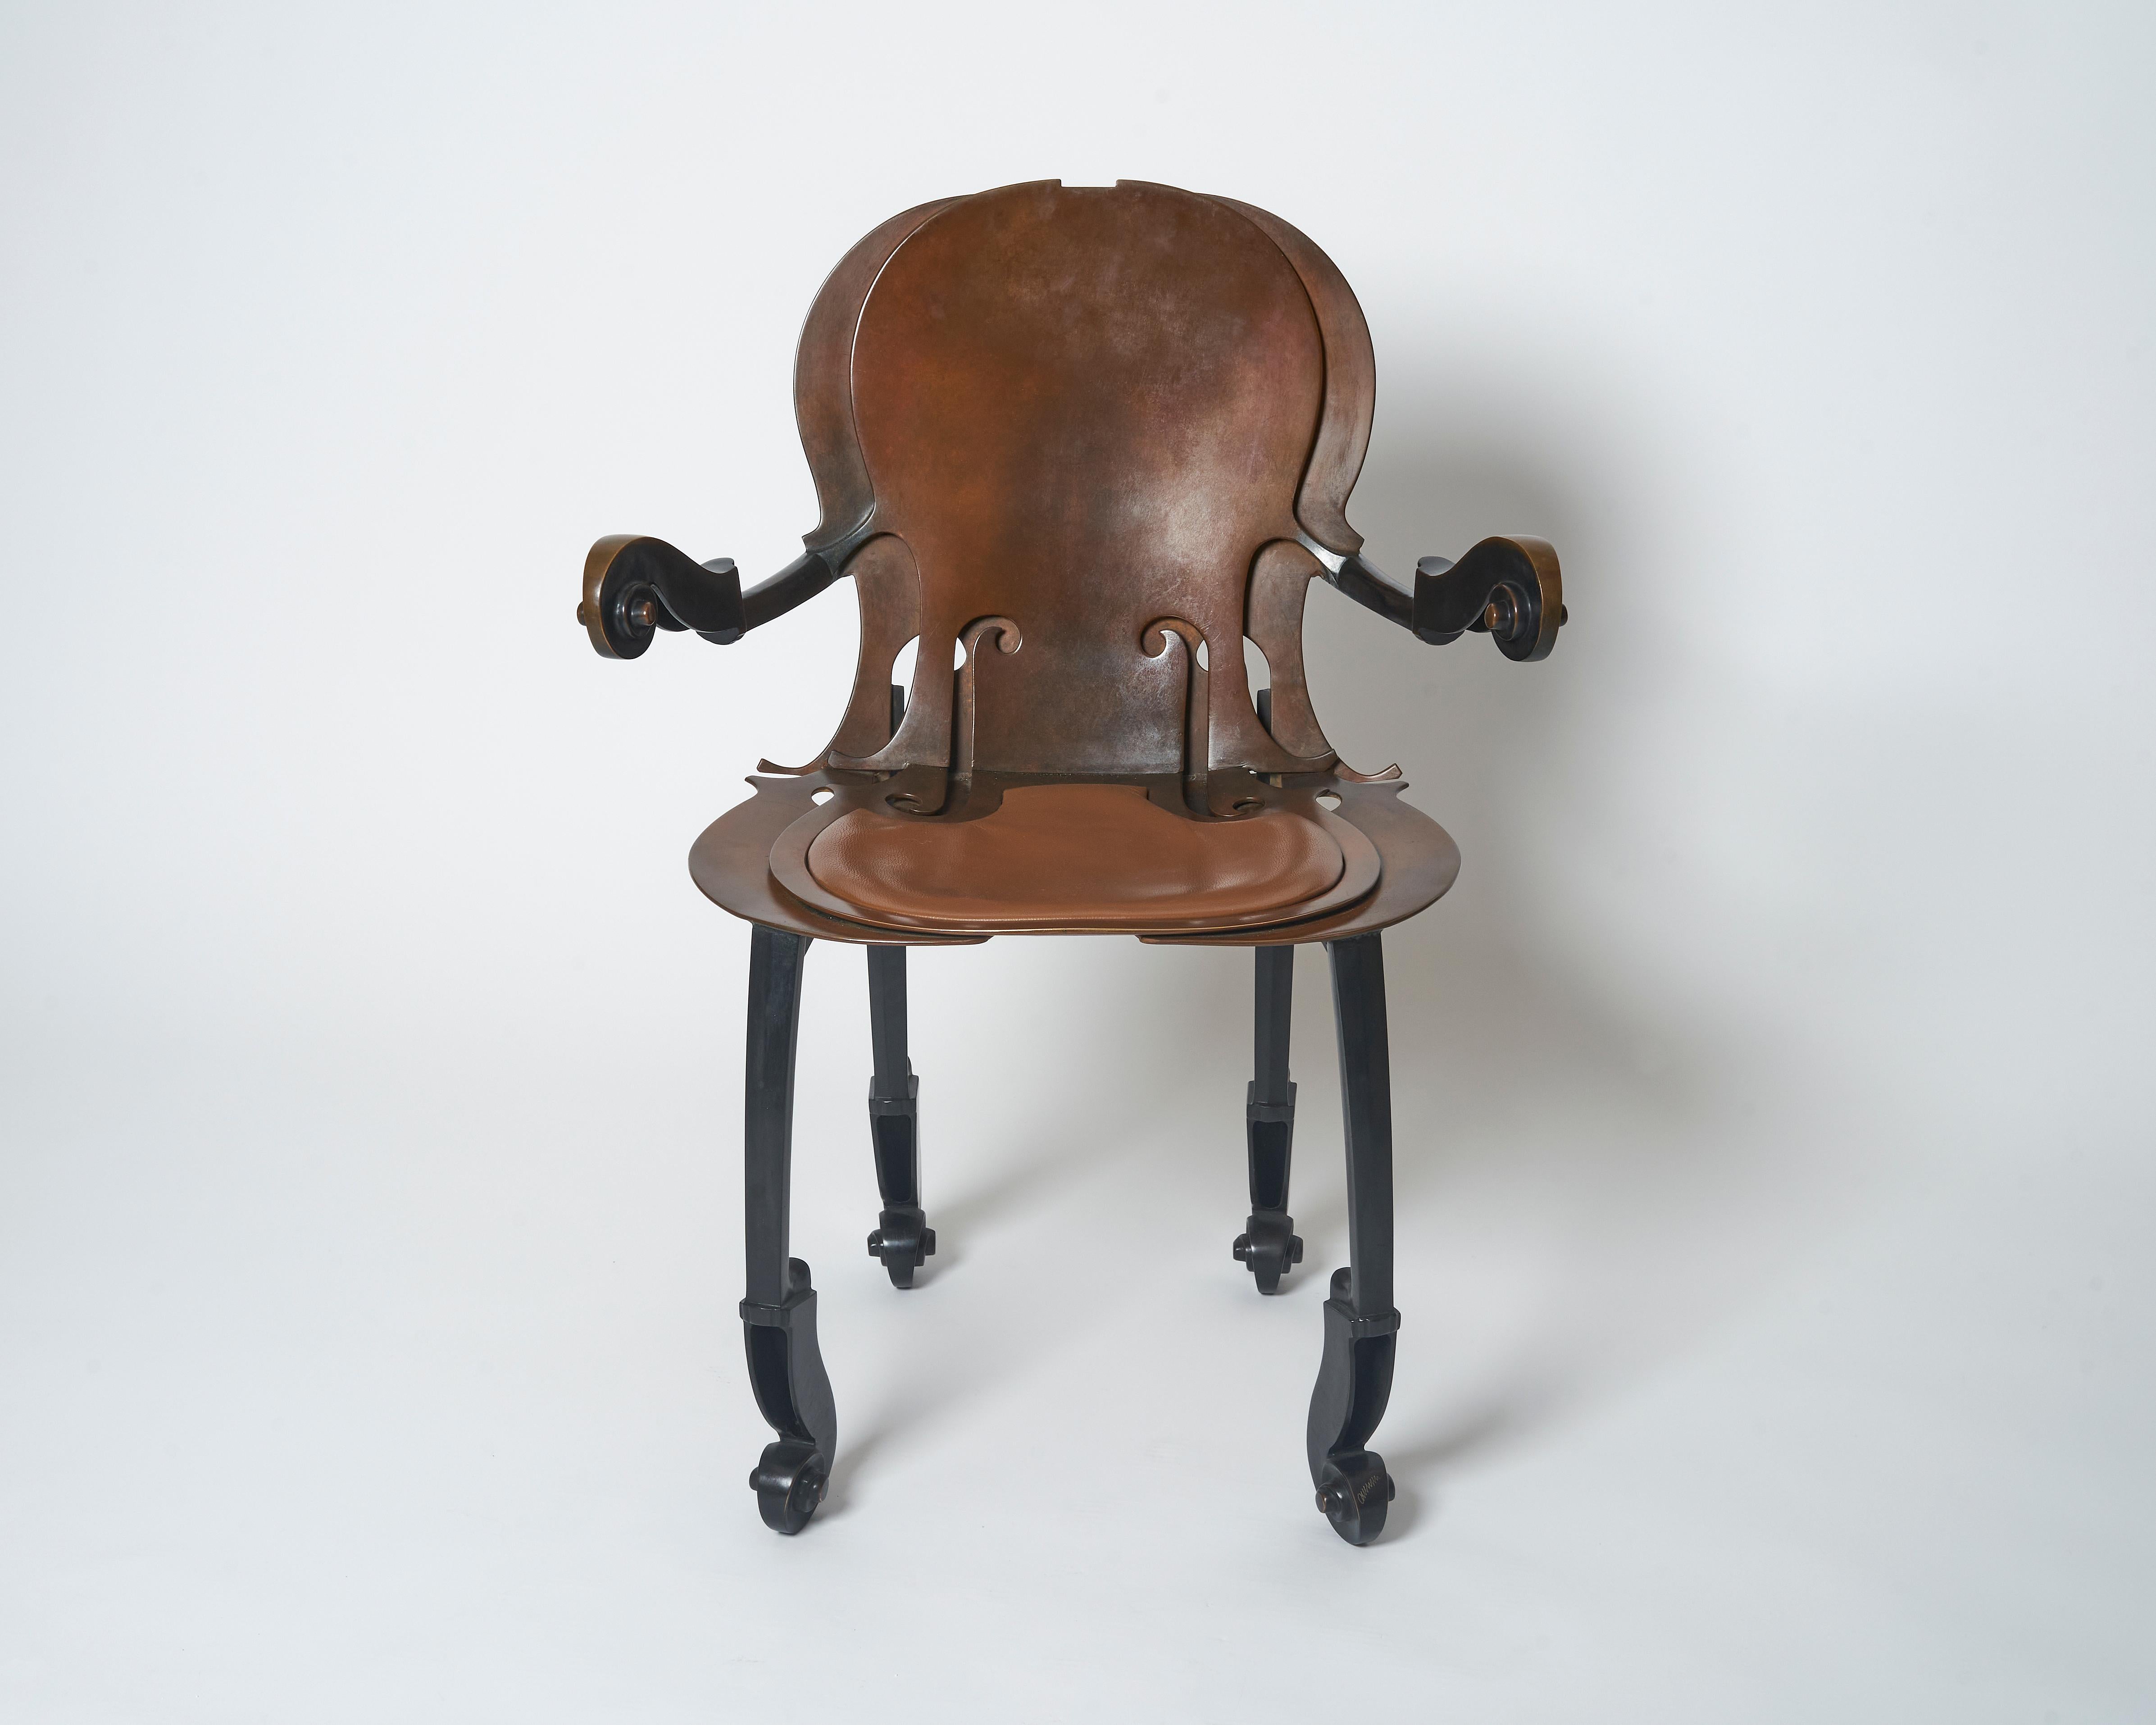 Bronze, leather upholstery

Fonderie d’art Bocquel, signed on the back.